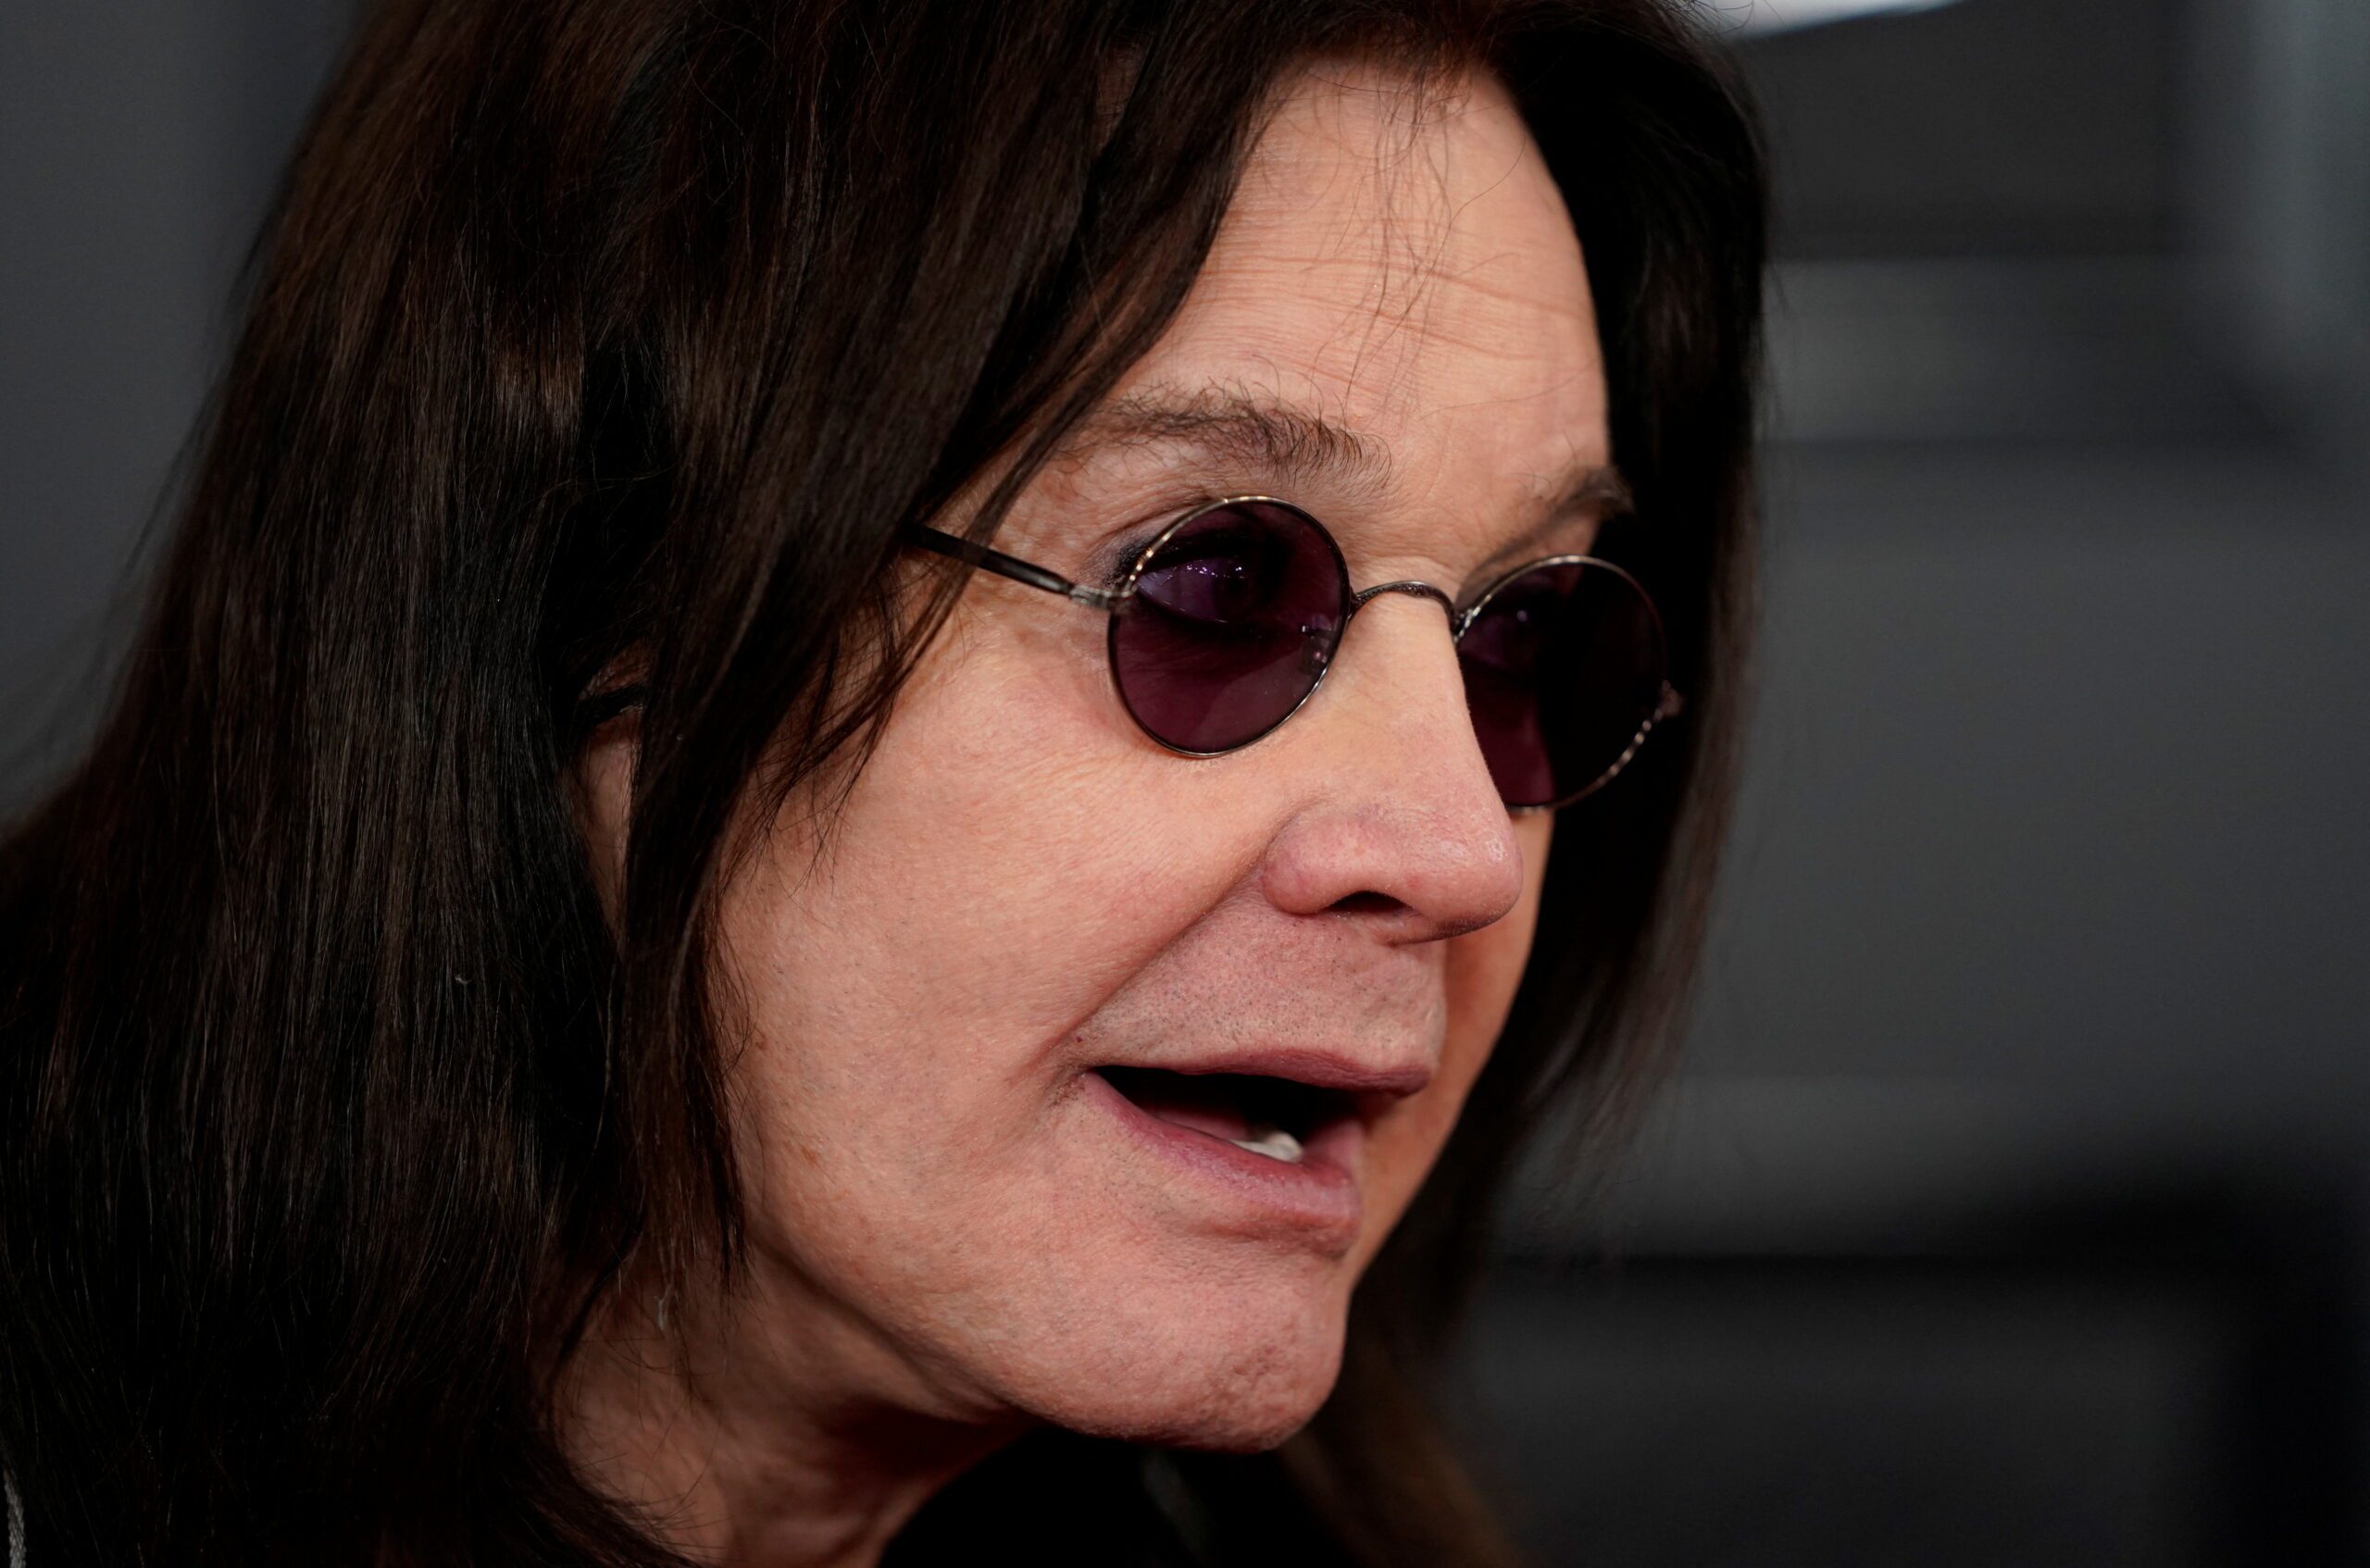 Rocker Ozzy Osbourne ‘on road to recovery’ after surgery